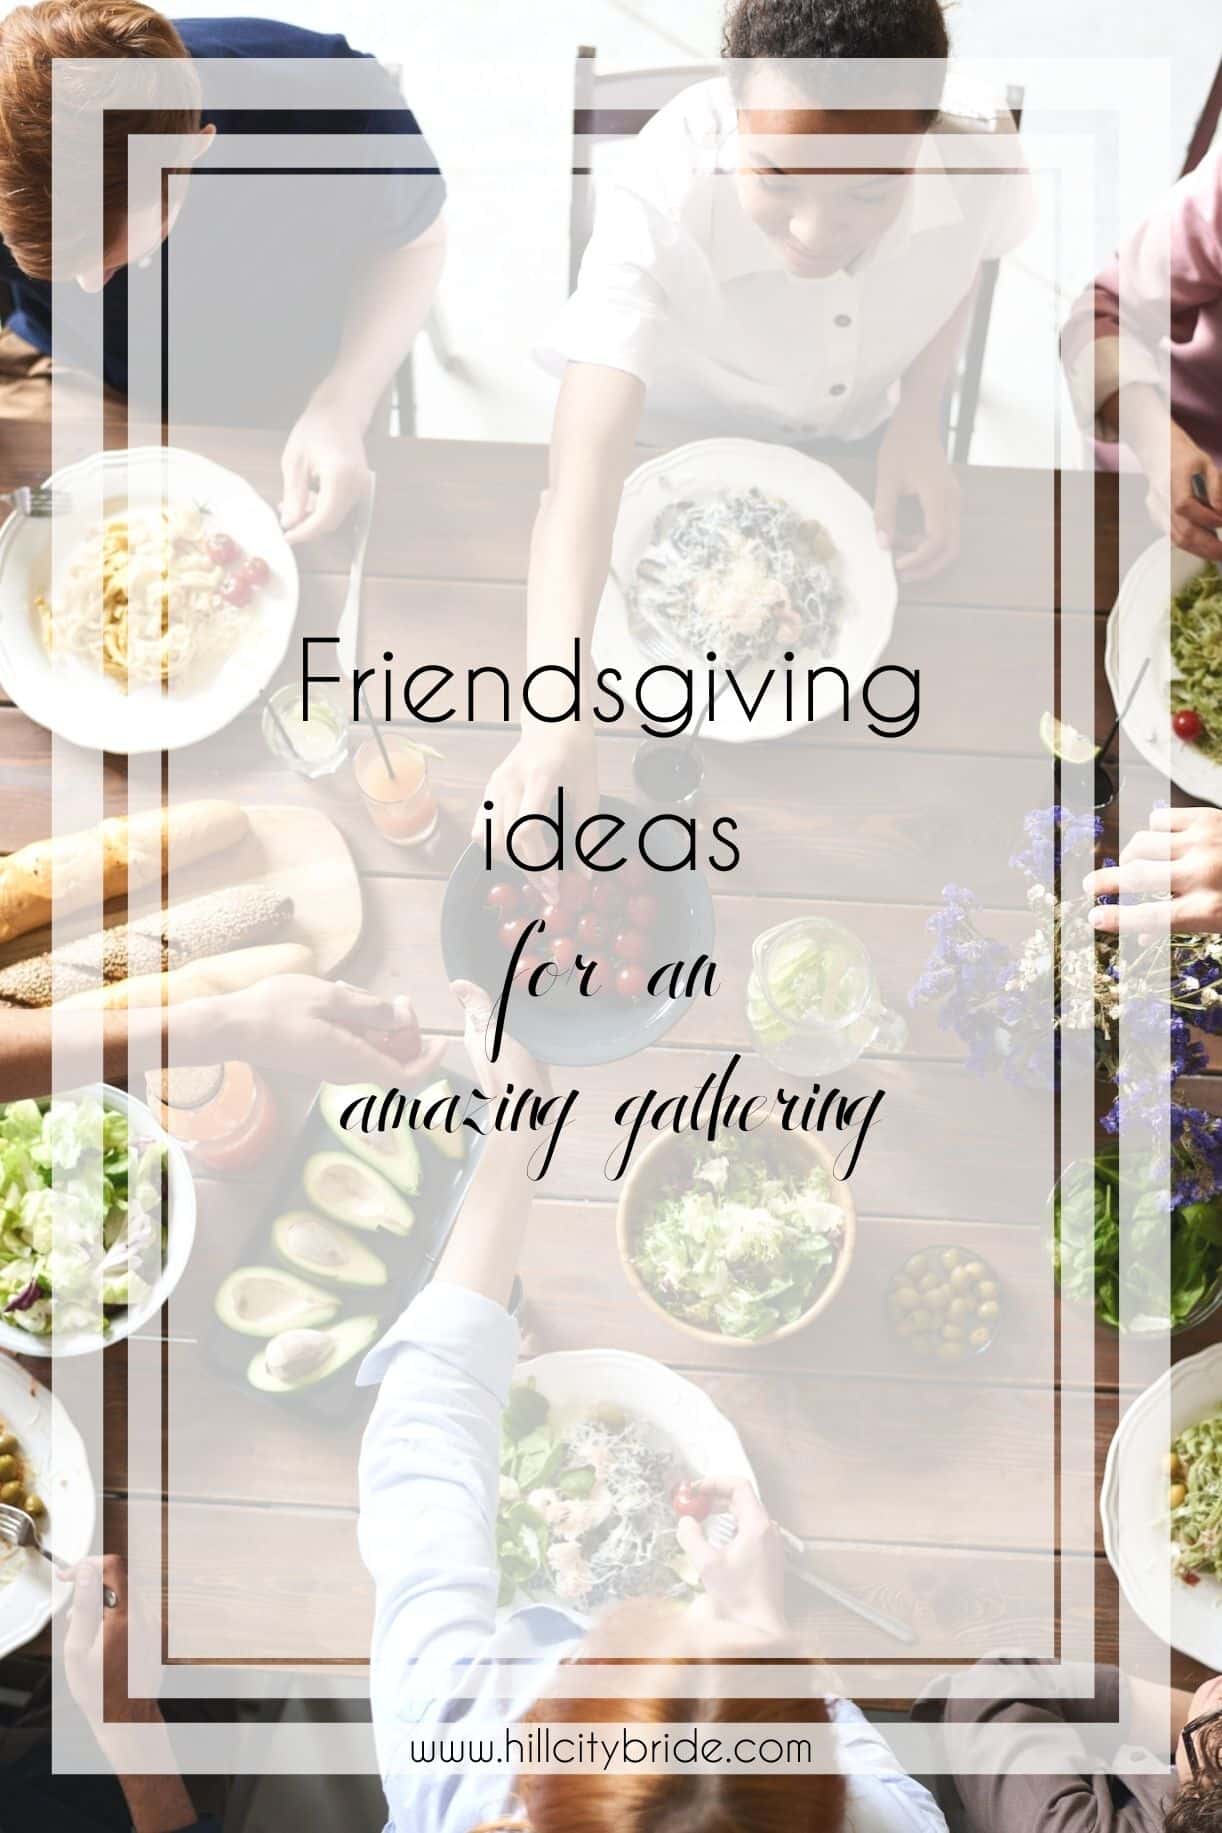 Friendsgiving Ideas Guaranteed to Make Your Holiday Amazing